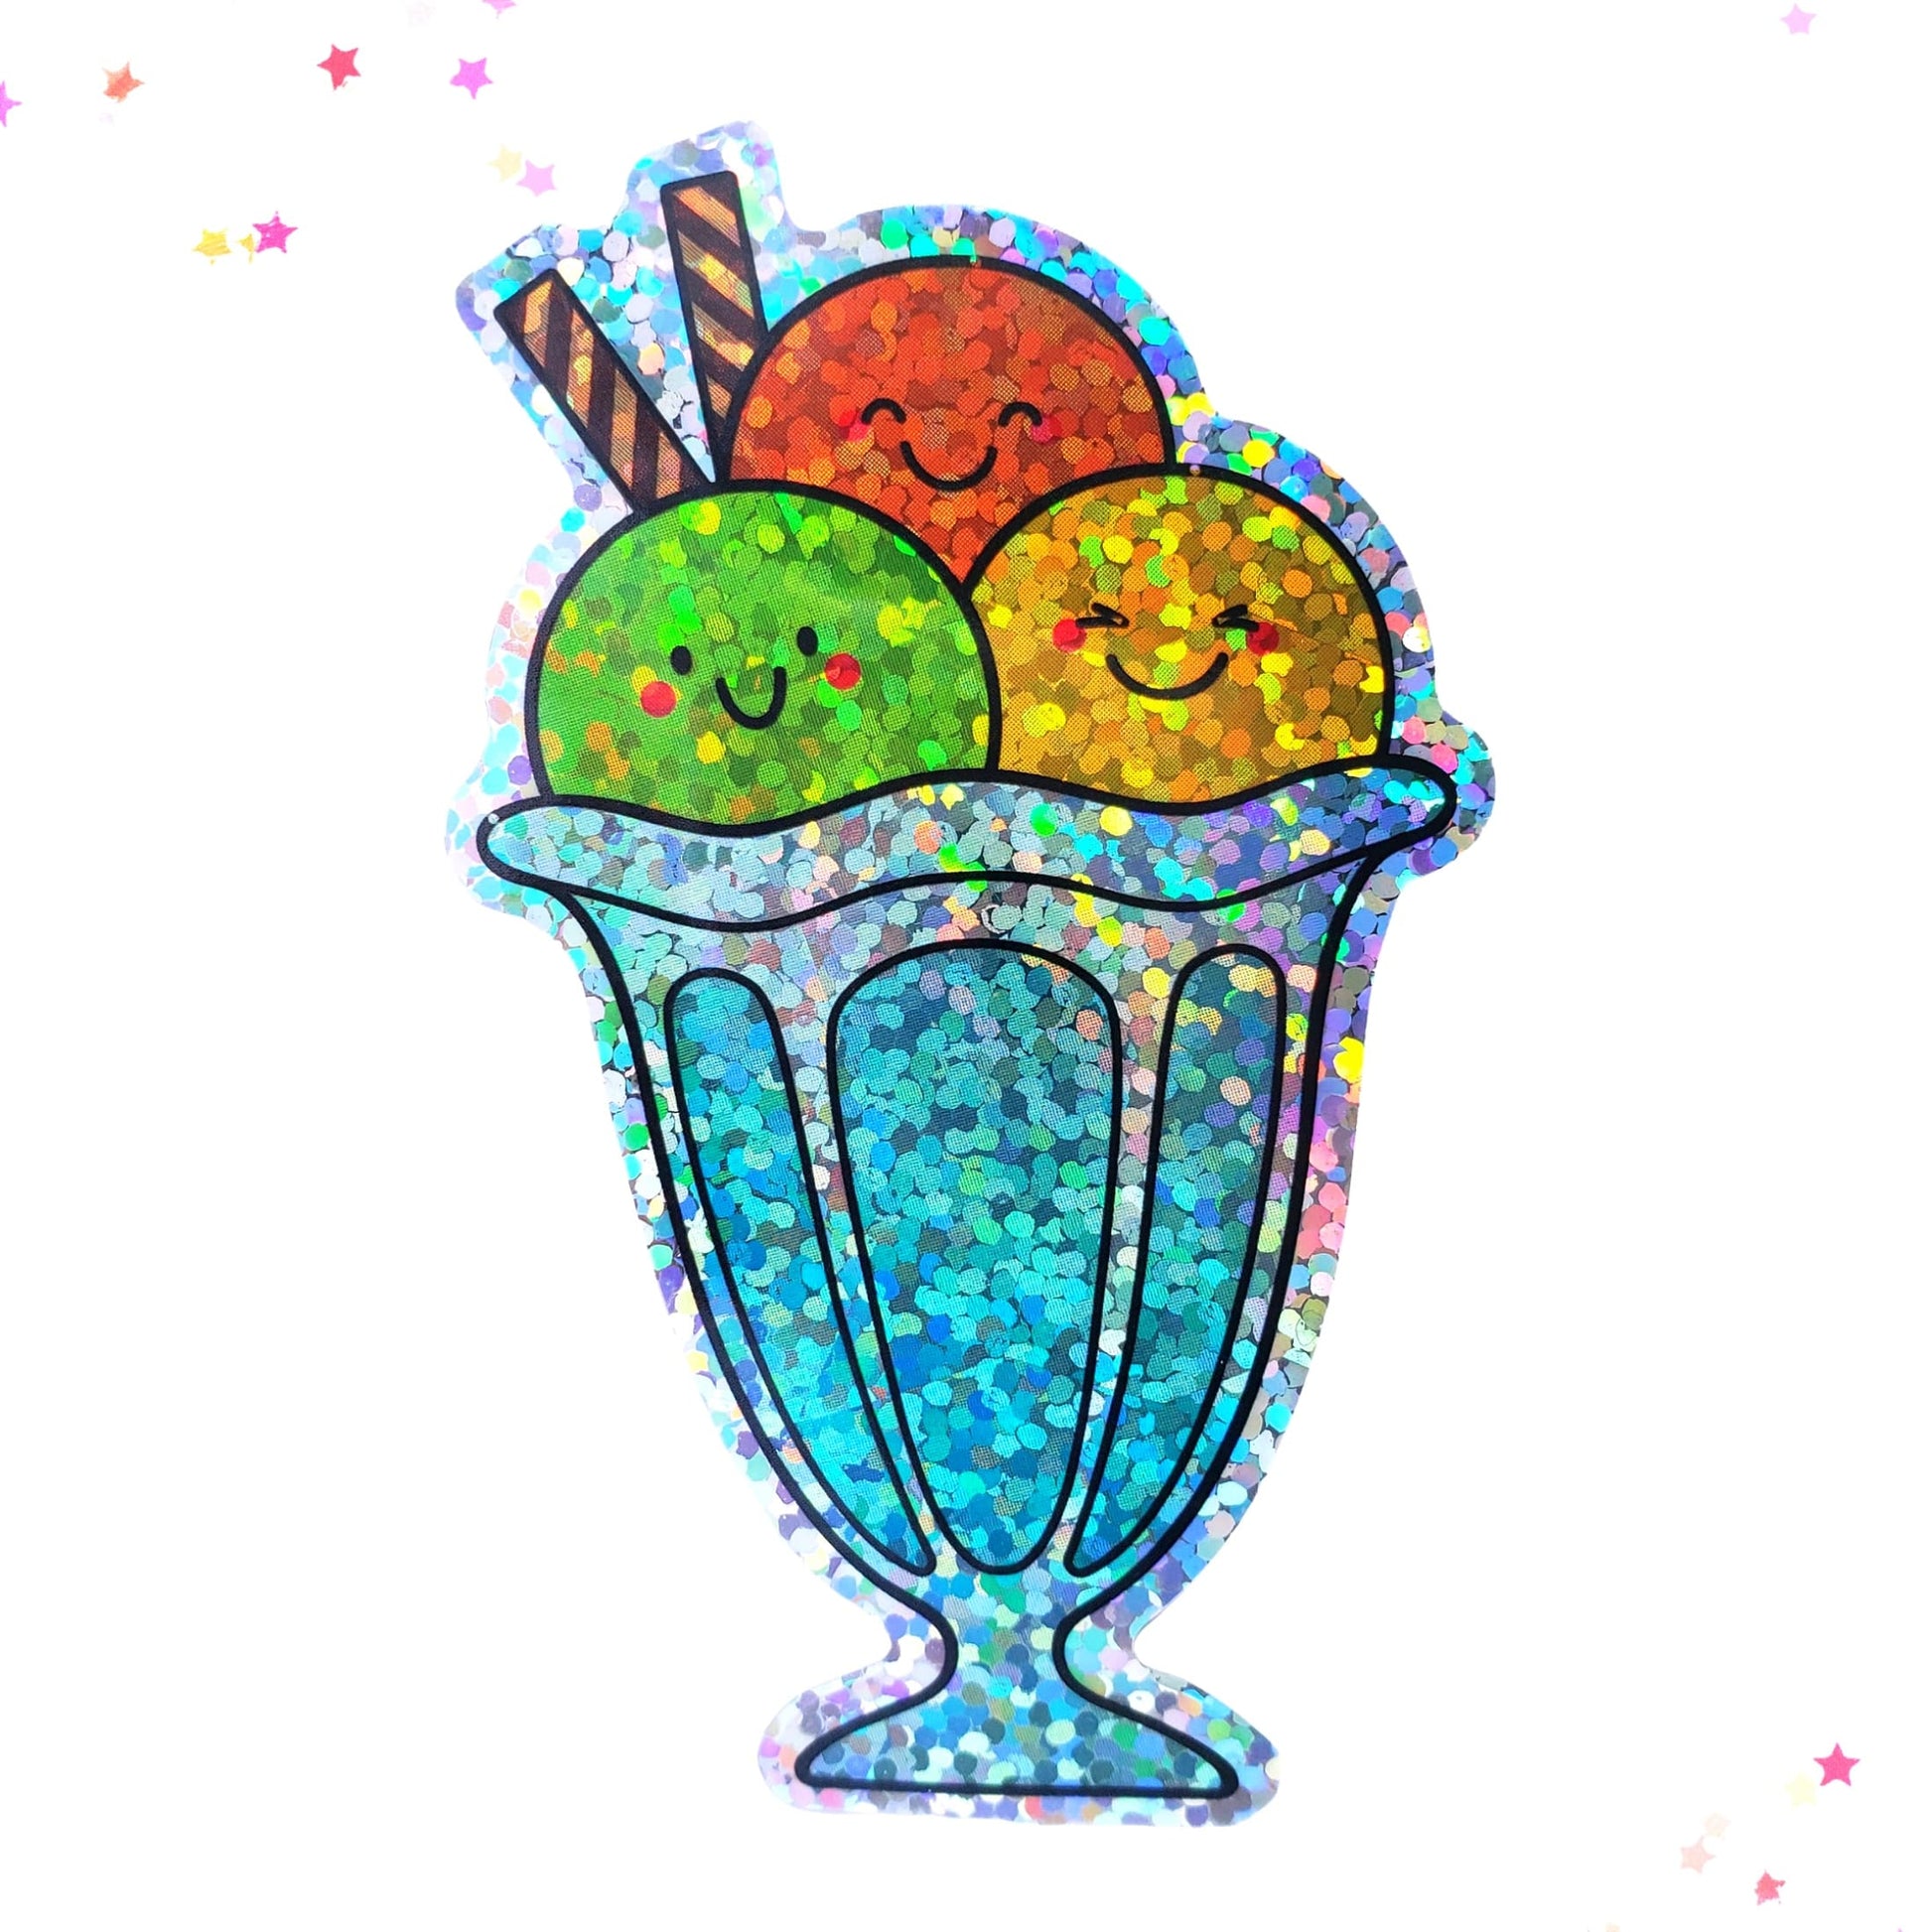 Premium Sticker - Sparkly Holographic Glitter Ice Cream Parfait from Confetti Kitty, Only 2.00